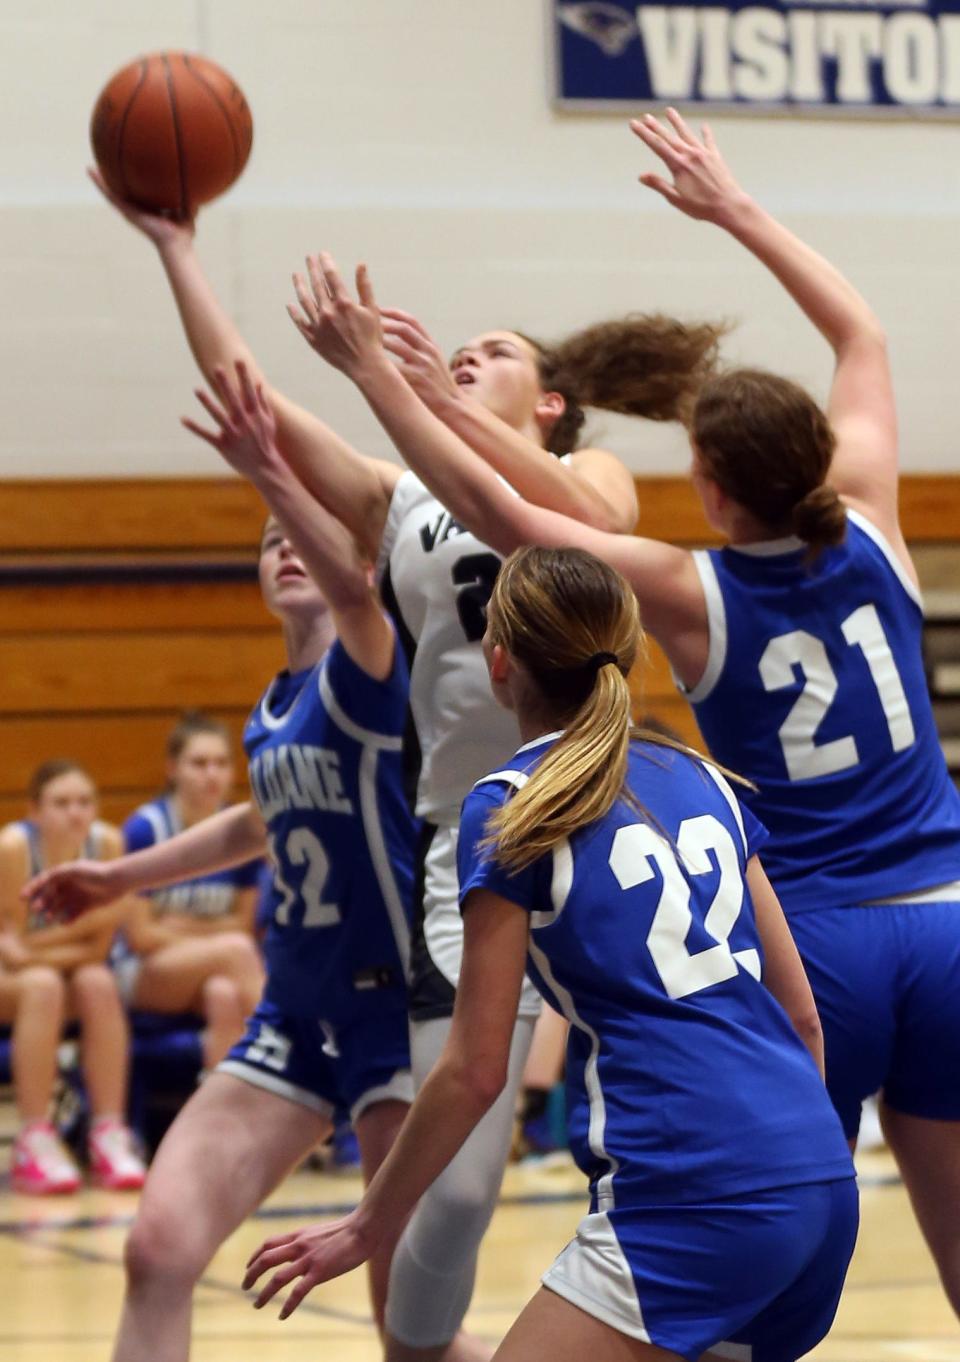 Putnam Valley's Eva DeChent (21) goes up for a shot against Haldane on her way to scoring her 2,000th point in a game at Putnam Valley High School Feb. 7, 2023.